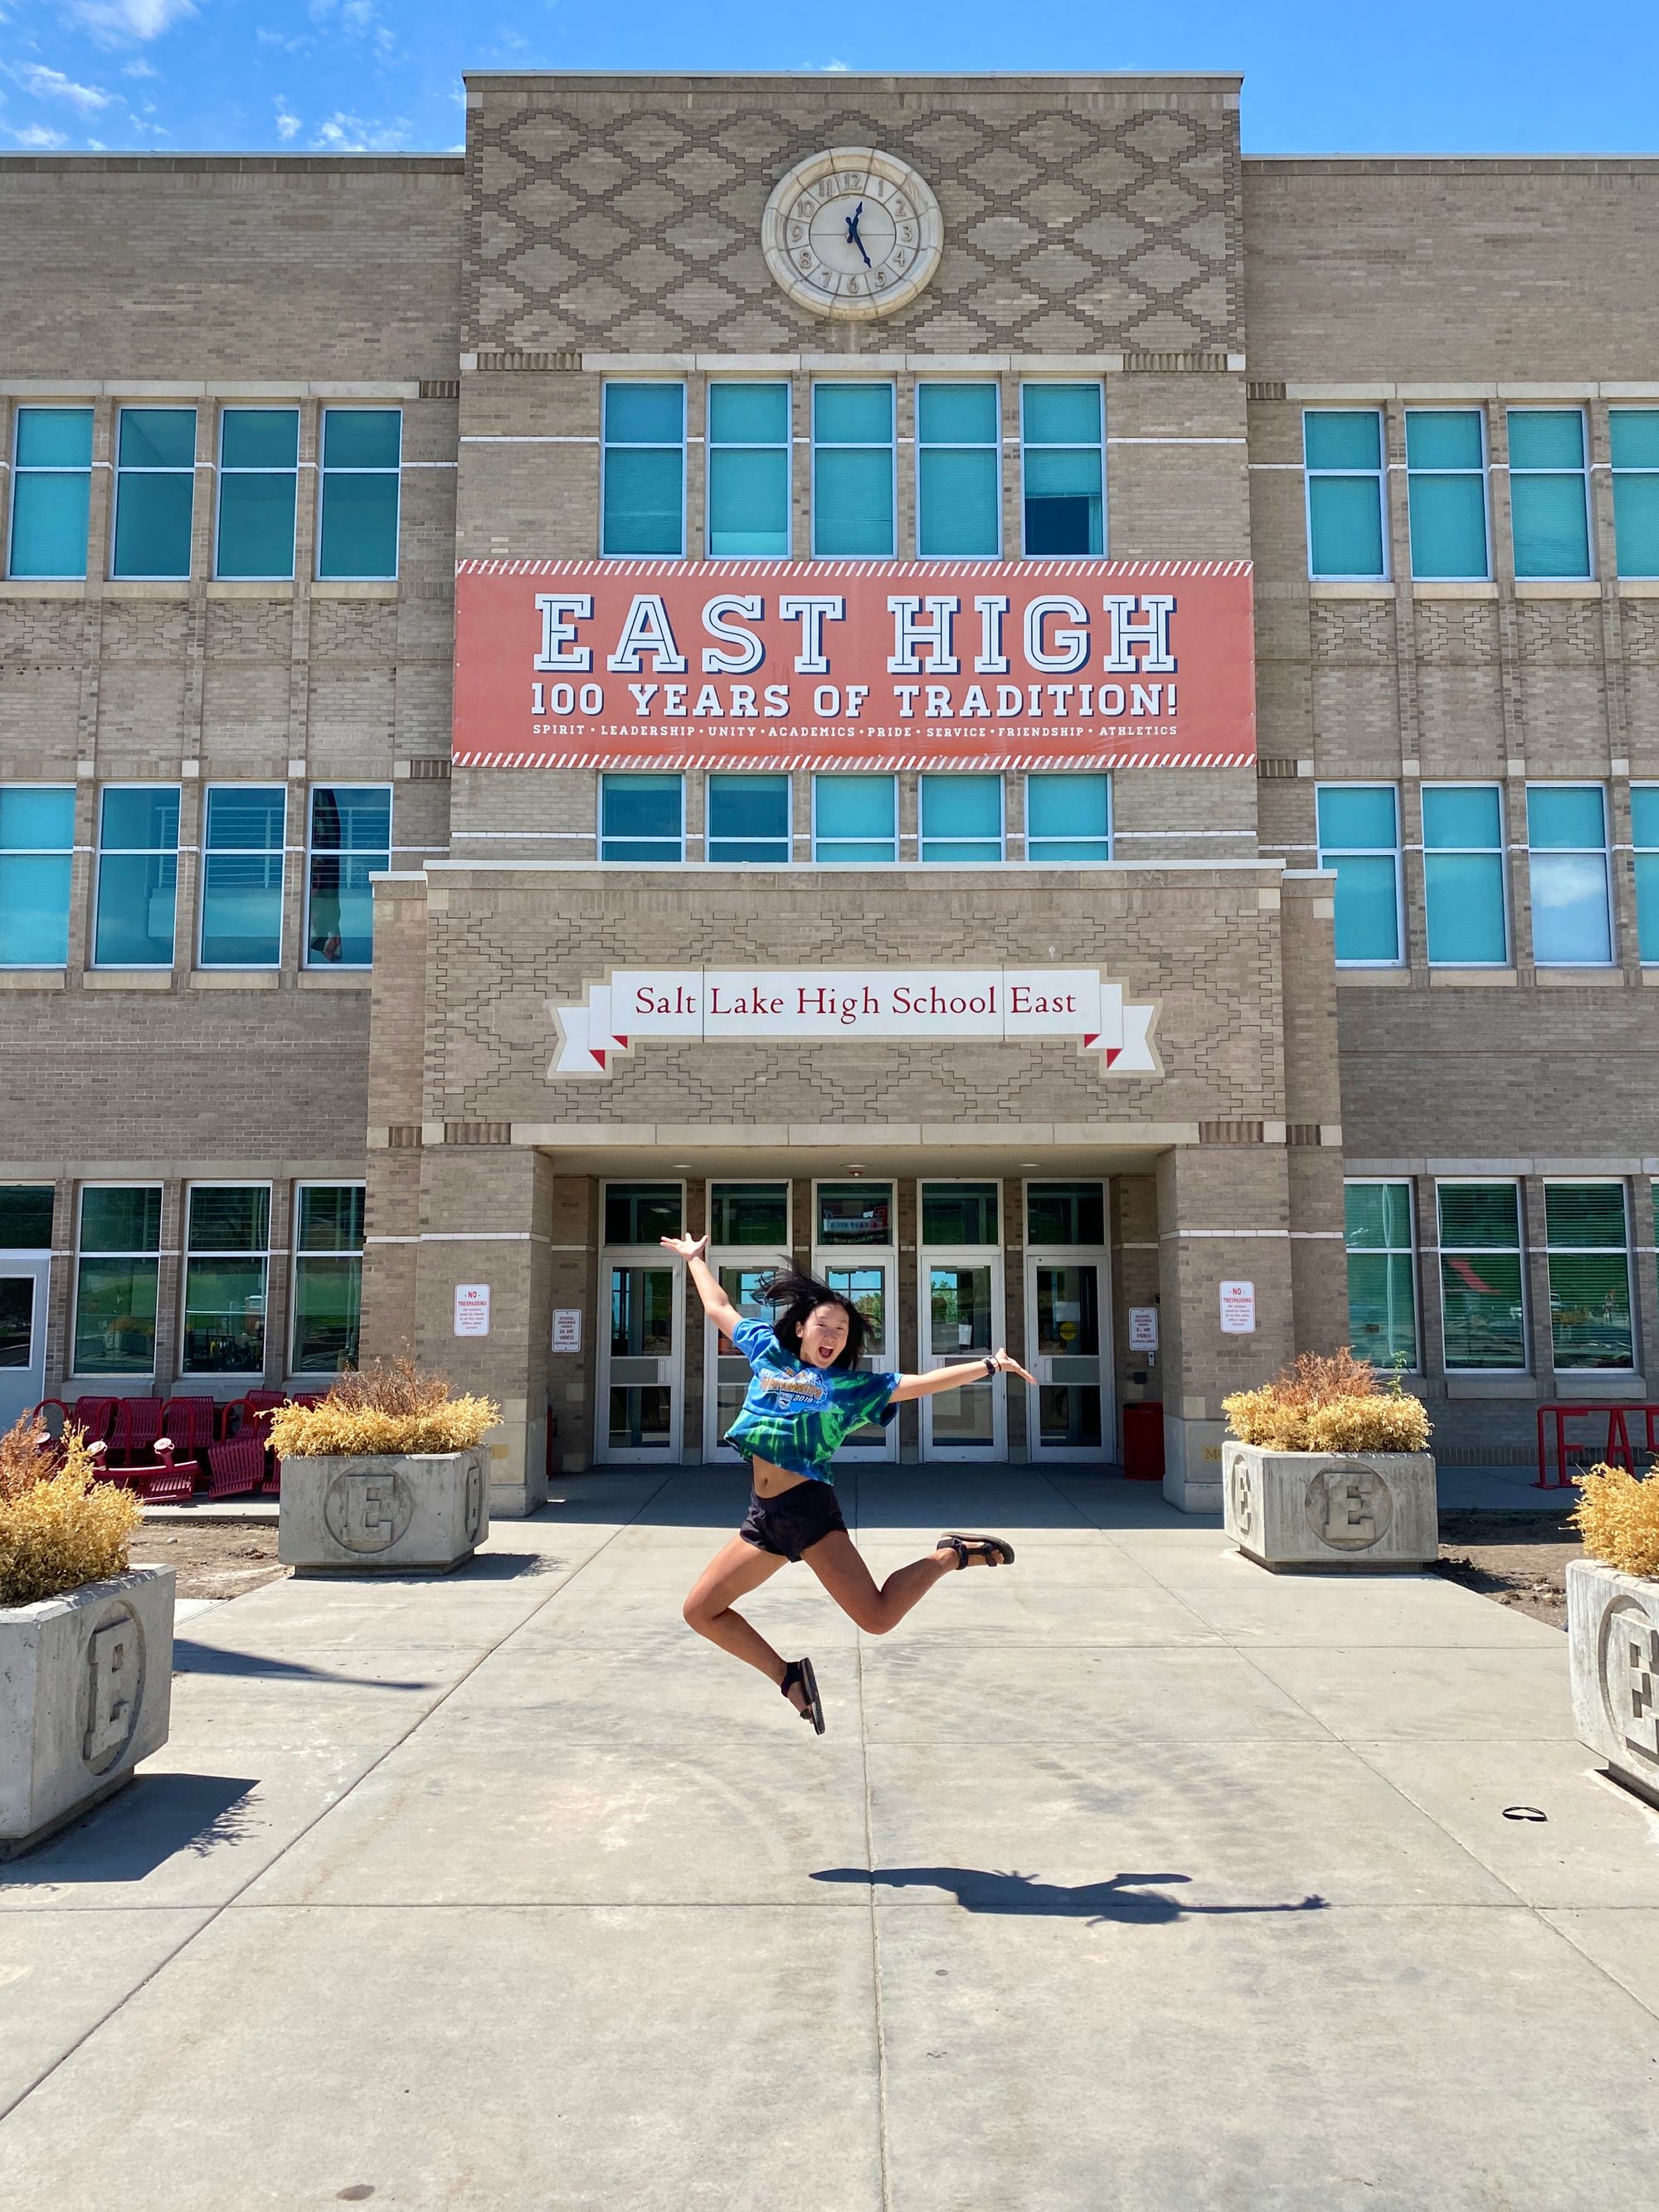 Checking out East High